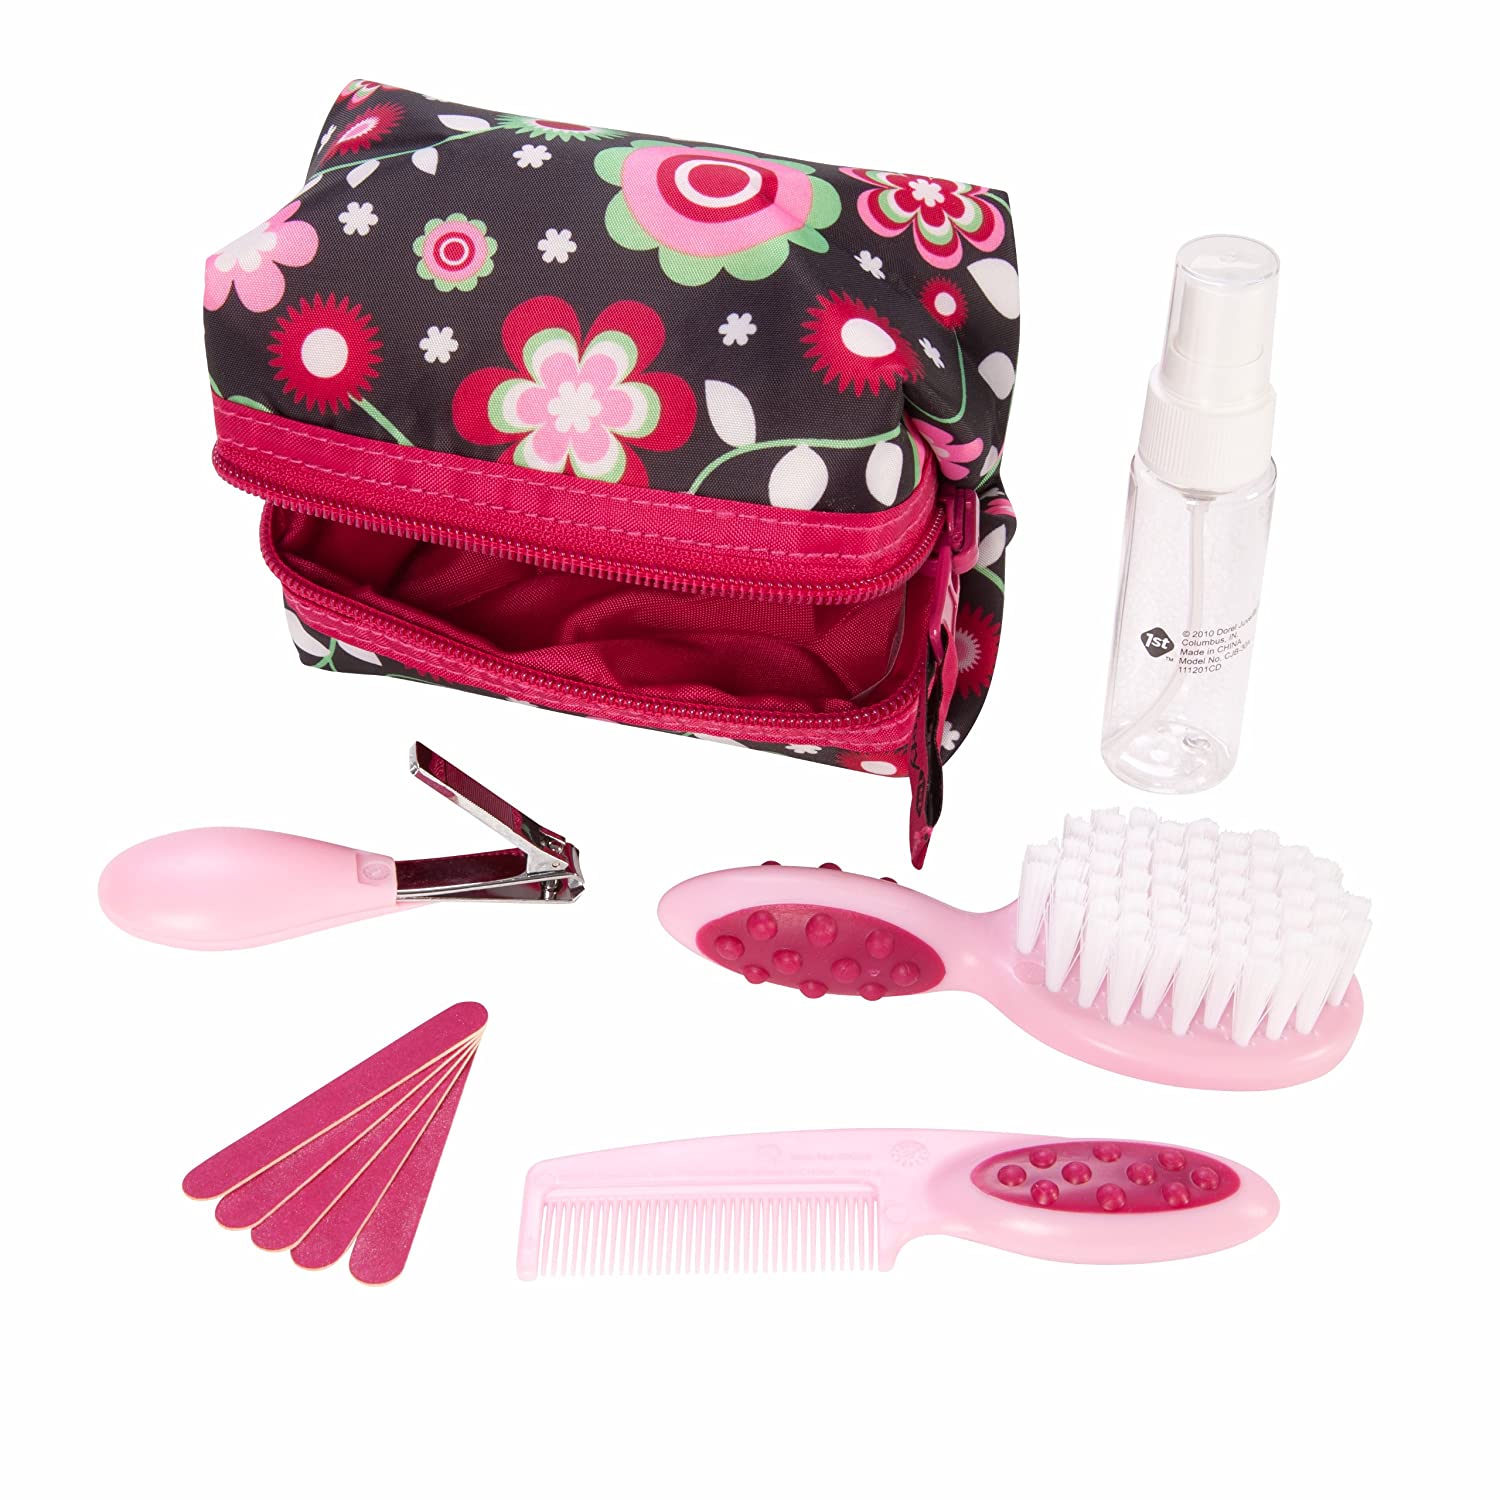 Safety 1st Baby's 1st Grooming Kit, Raspberry